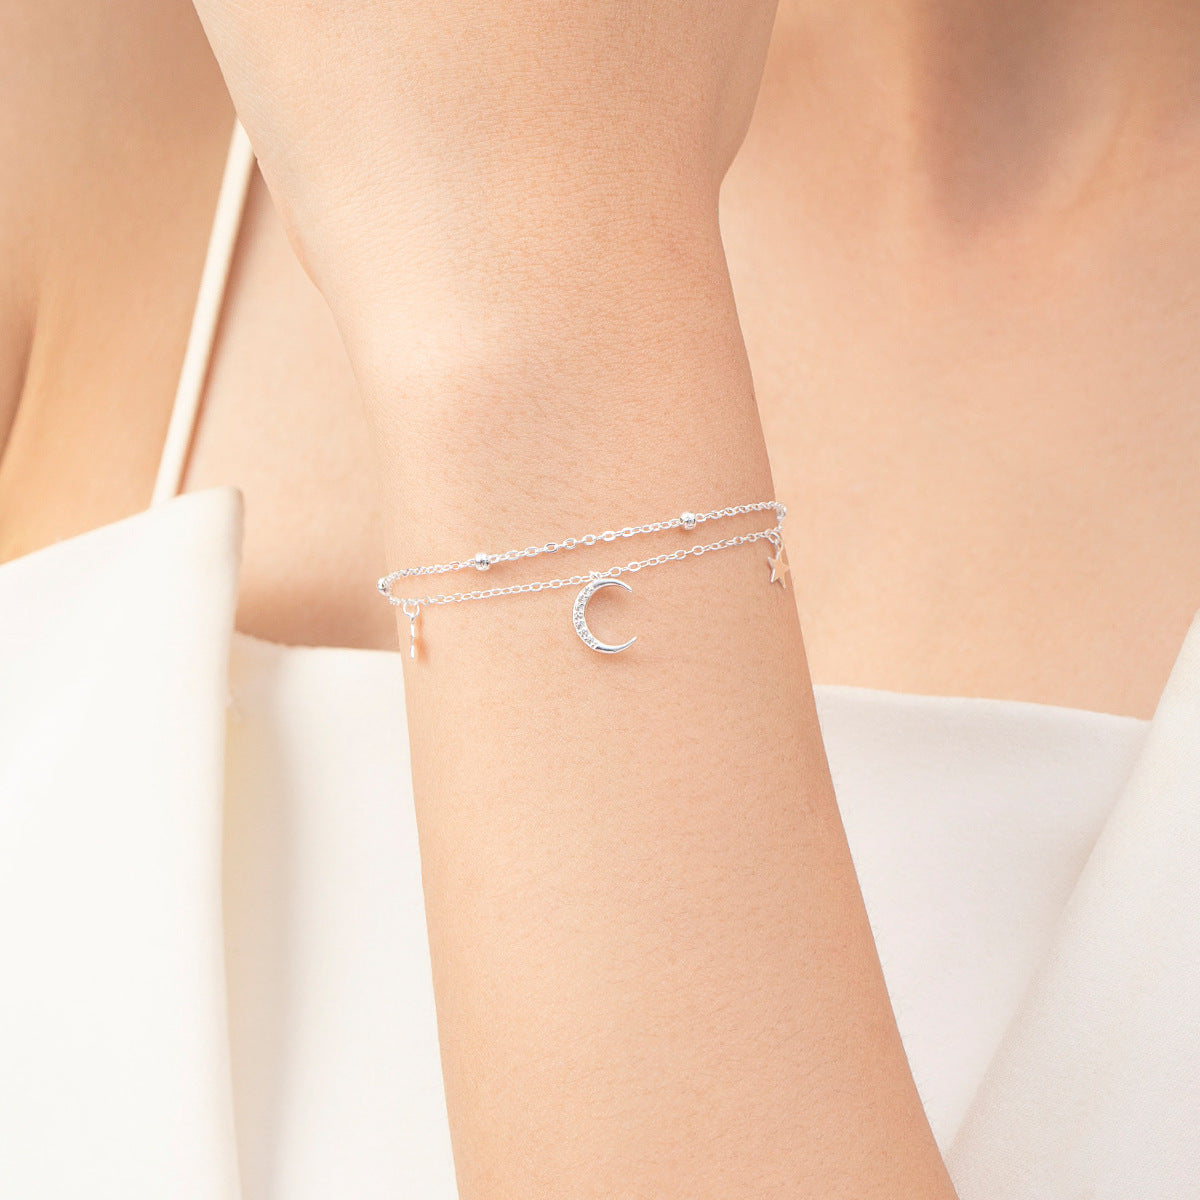 Double Layered Sterling Silver Star Moon Bracelet for Women with Zircon Accents